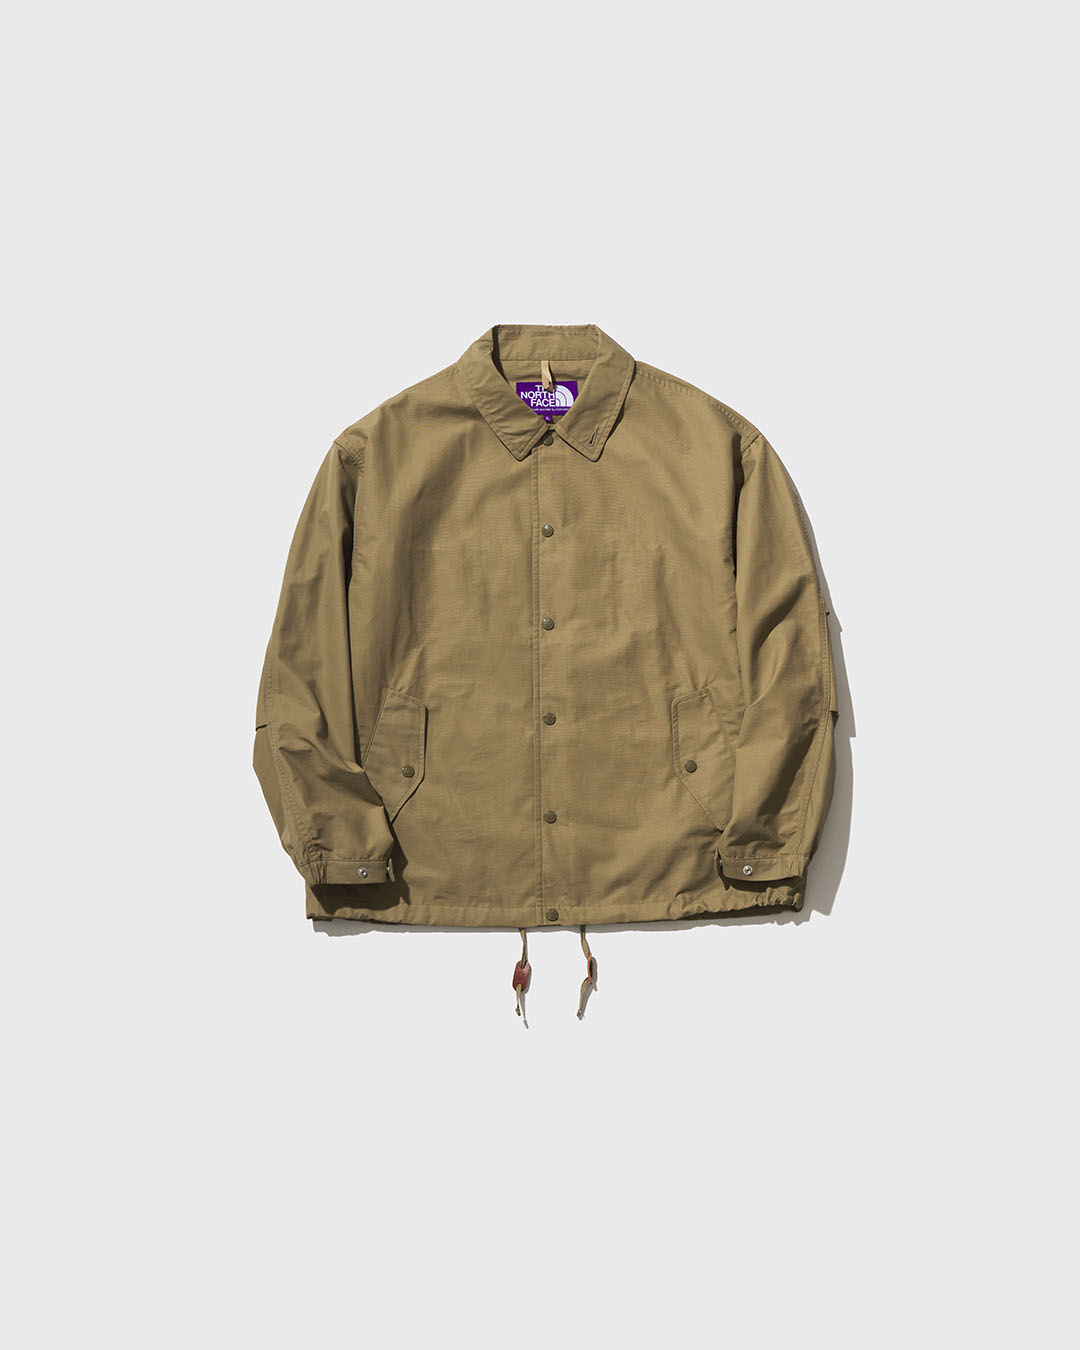 nanamica / THE NORTH FACE PURPLE LABEL / Featured Product vol.32